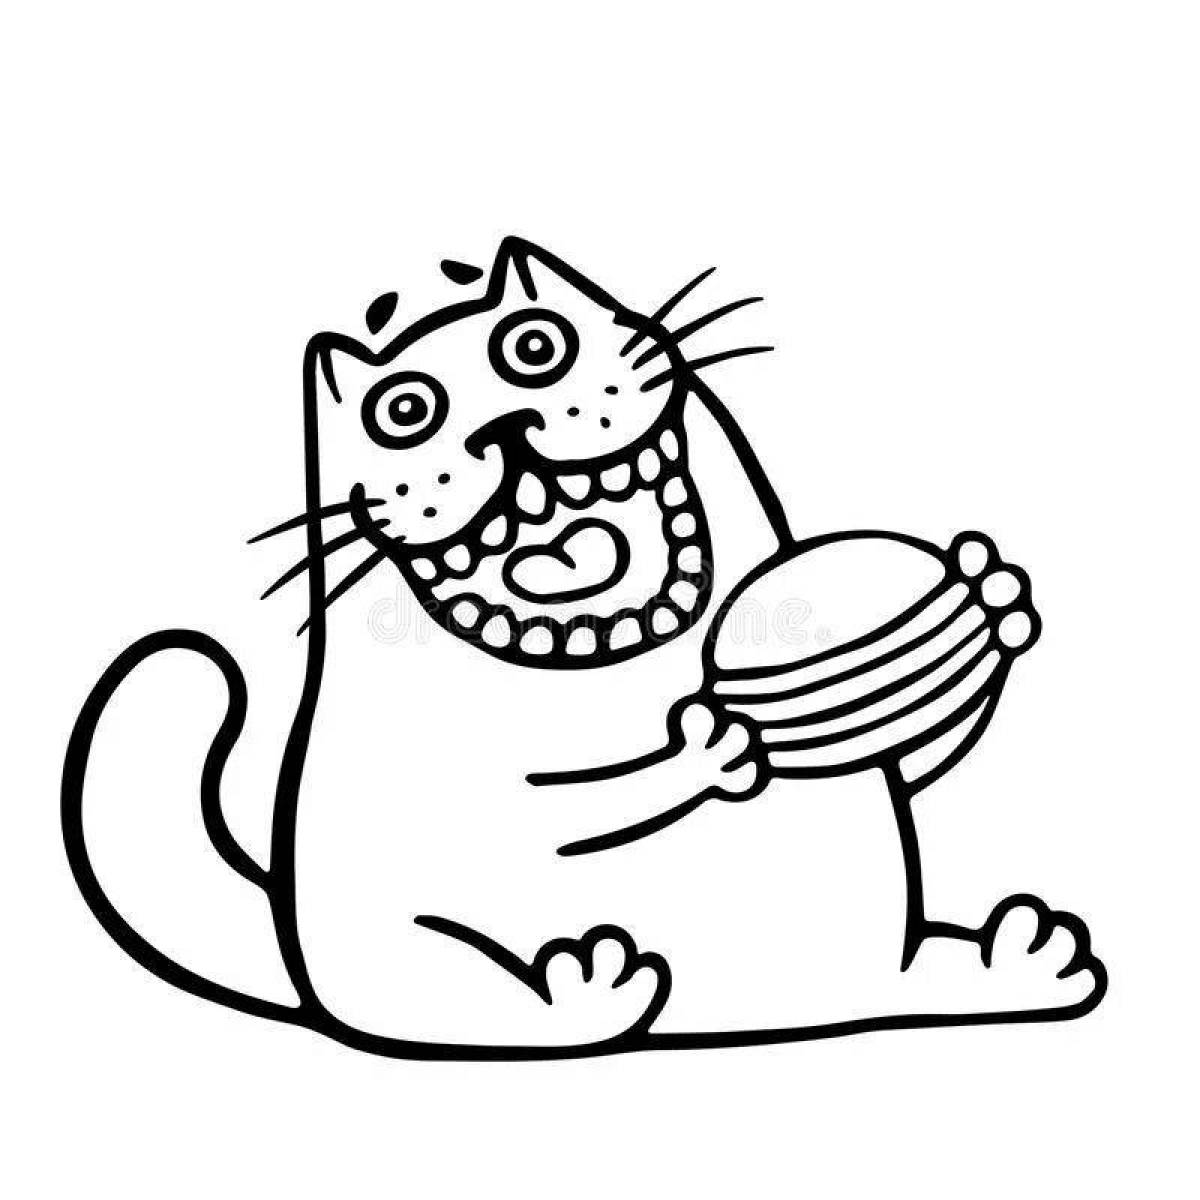 Sweet burger cat coloring page